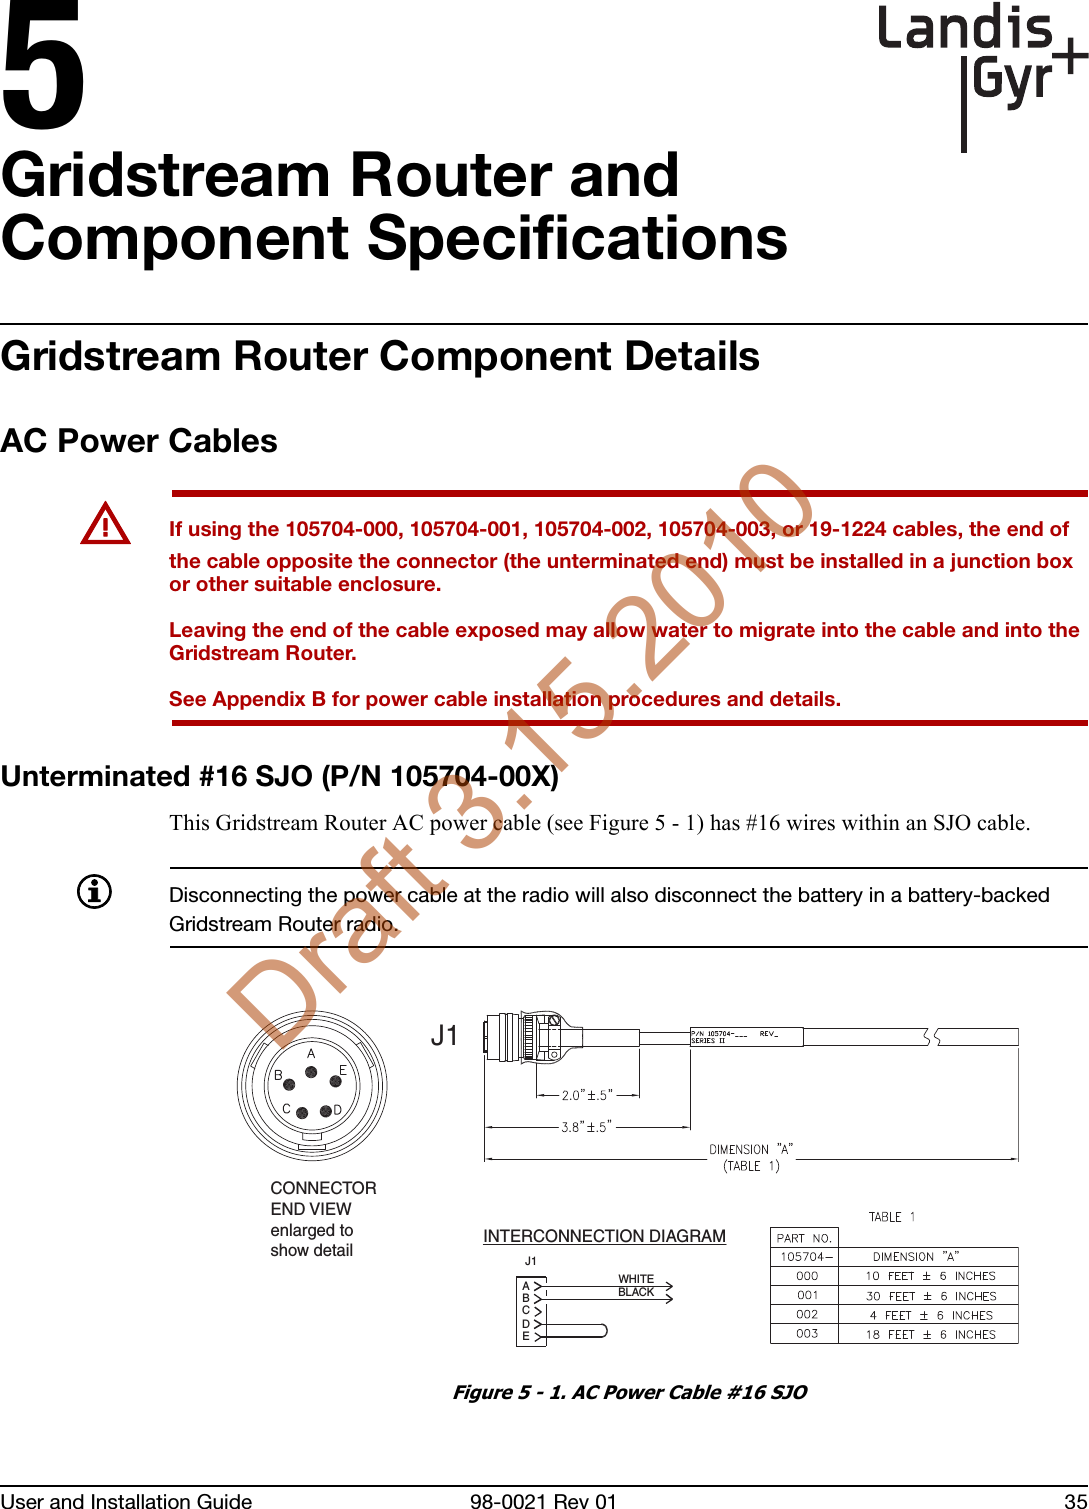 5User and Installation Guide 98-0021 Rev 01 35Gridstream Router and Component SpecificationsGridstream Router Component DetailsAC Power CablesUIf using the 105704-000, 105704-001, 105704-002, 105704-003, or 19-1224 cables, the end of the cable opposite the connector (the unterminated end) must be installed in a junction box or other suitable enclosure.Leaving the end of the cable exposed may allow water to migrate into the cable and into the Gridstream Router.See Appendix B for power cable installation procedures and details.Unterminated #16 SJO (P/N 105704-00X)This Gridstream Router AC power cable (see Figure 5 - 1) has #16 wires within an SJO cable.Disconnecting the power cable at the radio will also disconnect the battery in a battery-backed Gridstream Router radio.Figure 5 - 1. AC Power Cable #16 SJOINTERCONNECTION DIAGRAMEDCBAJ1BLACKWHITEJ1CONNECTOREND VIEWenlarged toshow detailDraft 3.15.2010